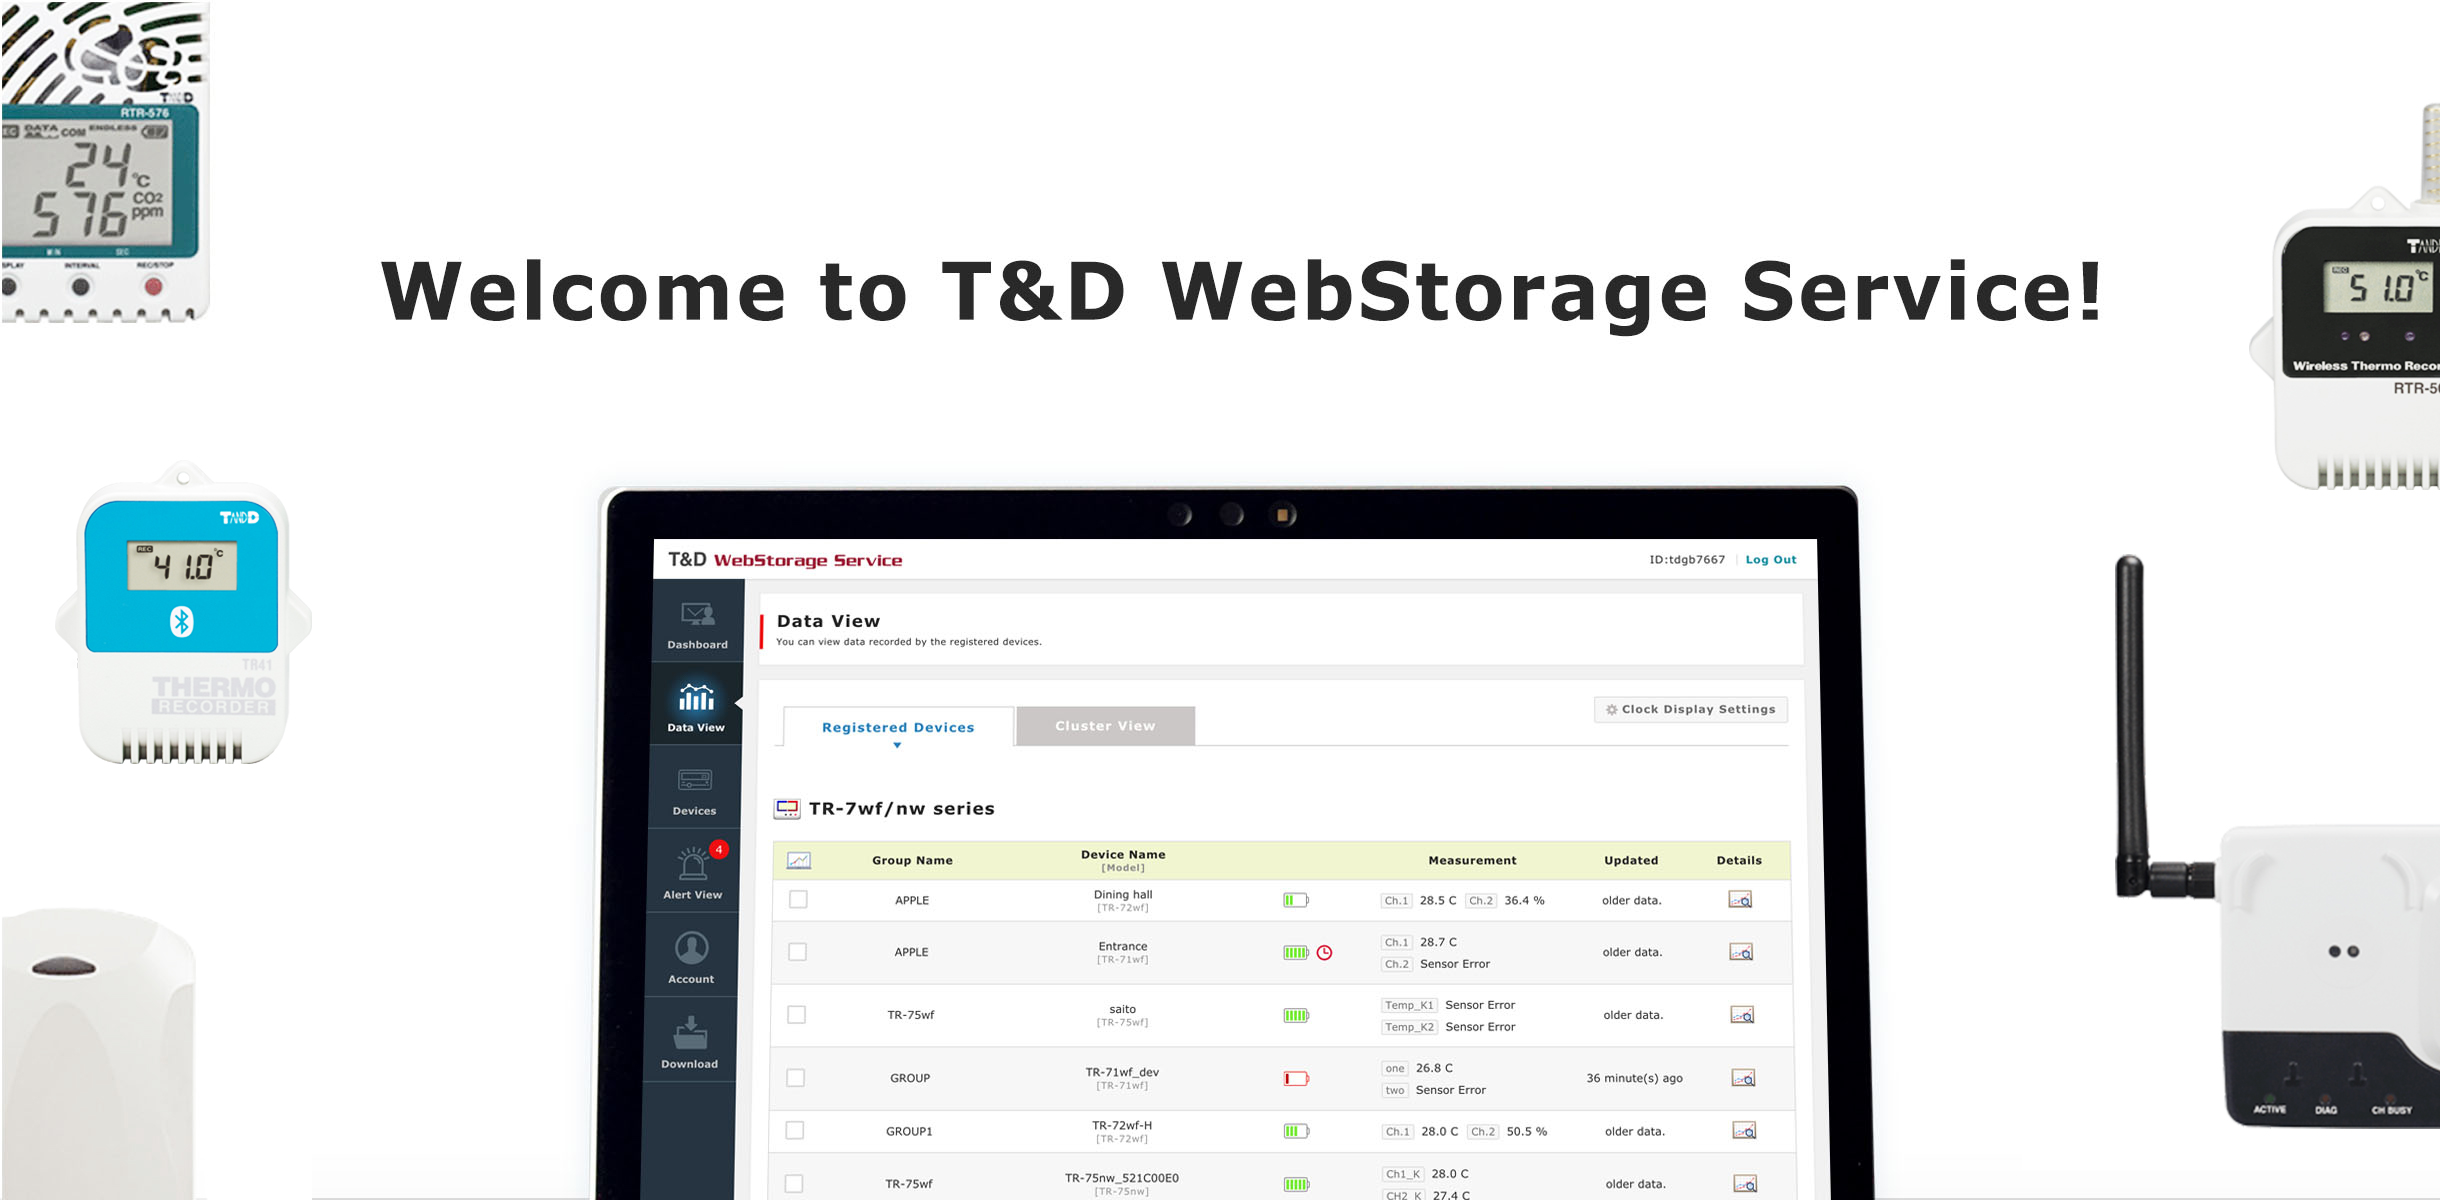 What You Can Do with T&D WebStorage Service